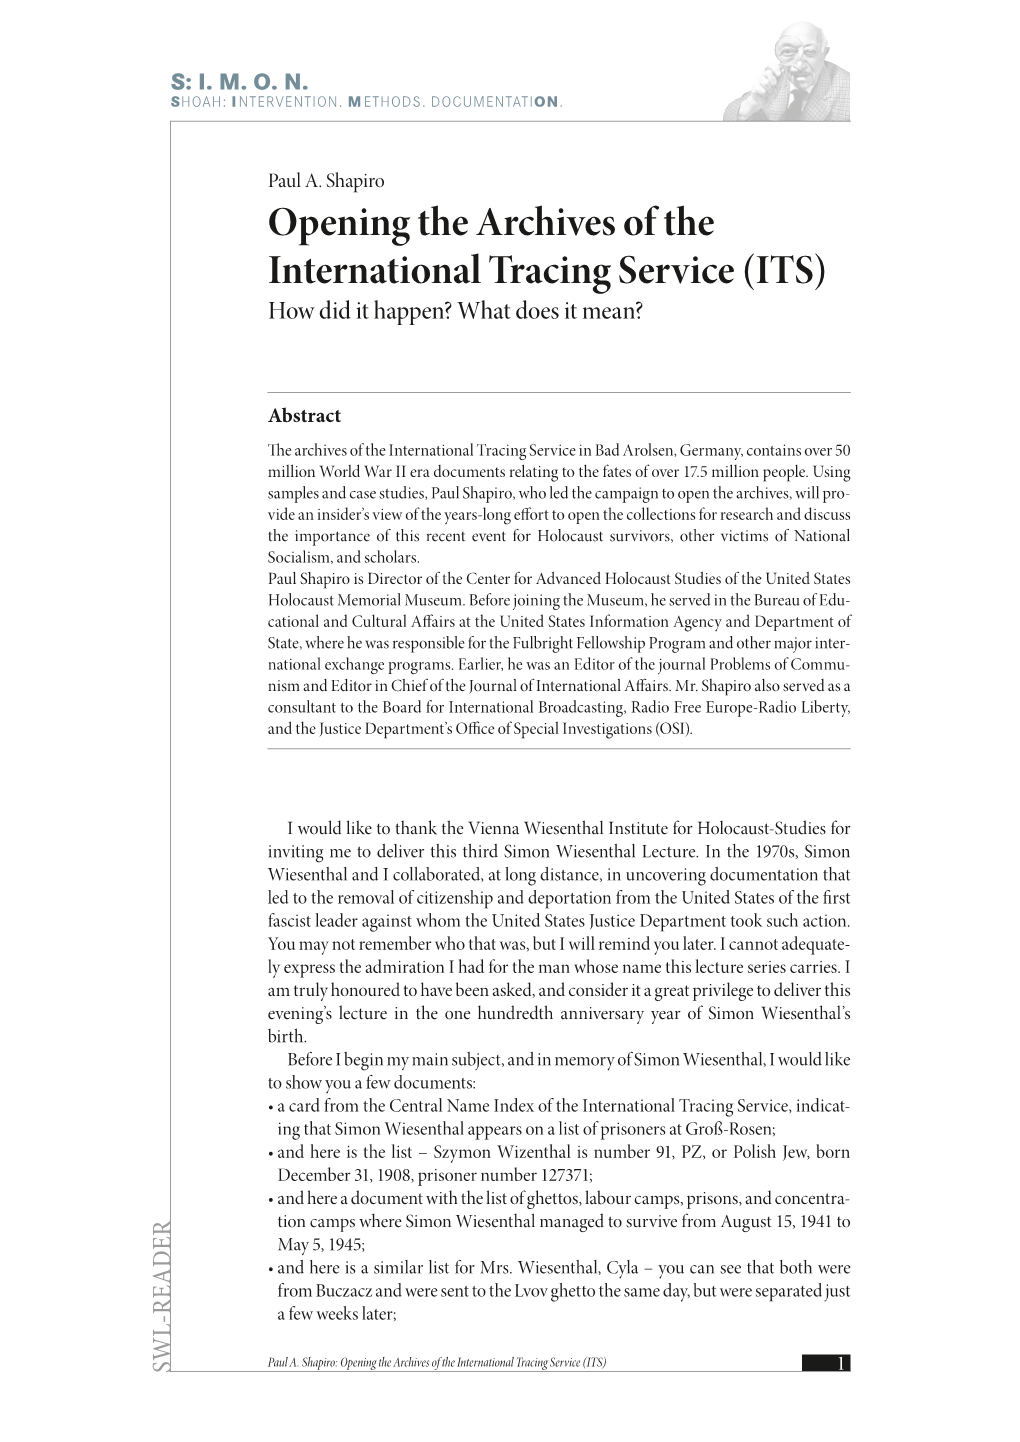 Opening the Archives of the International Tracing Service (ITS) How Did It Happen? What Does It Mean?